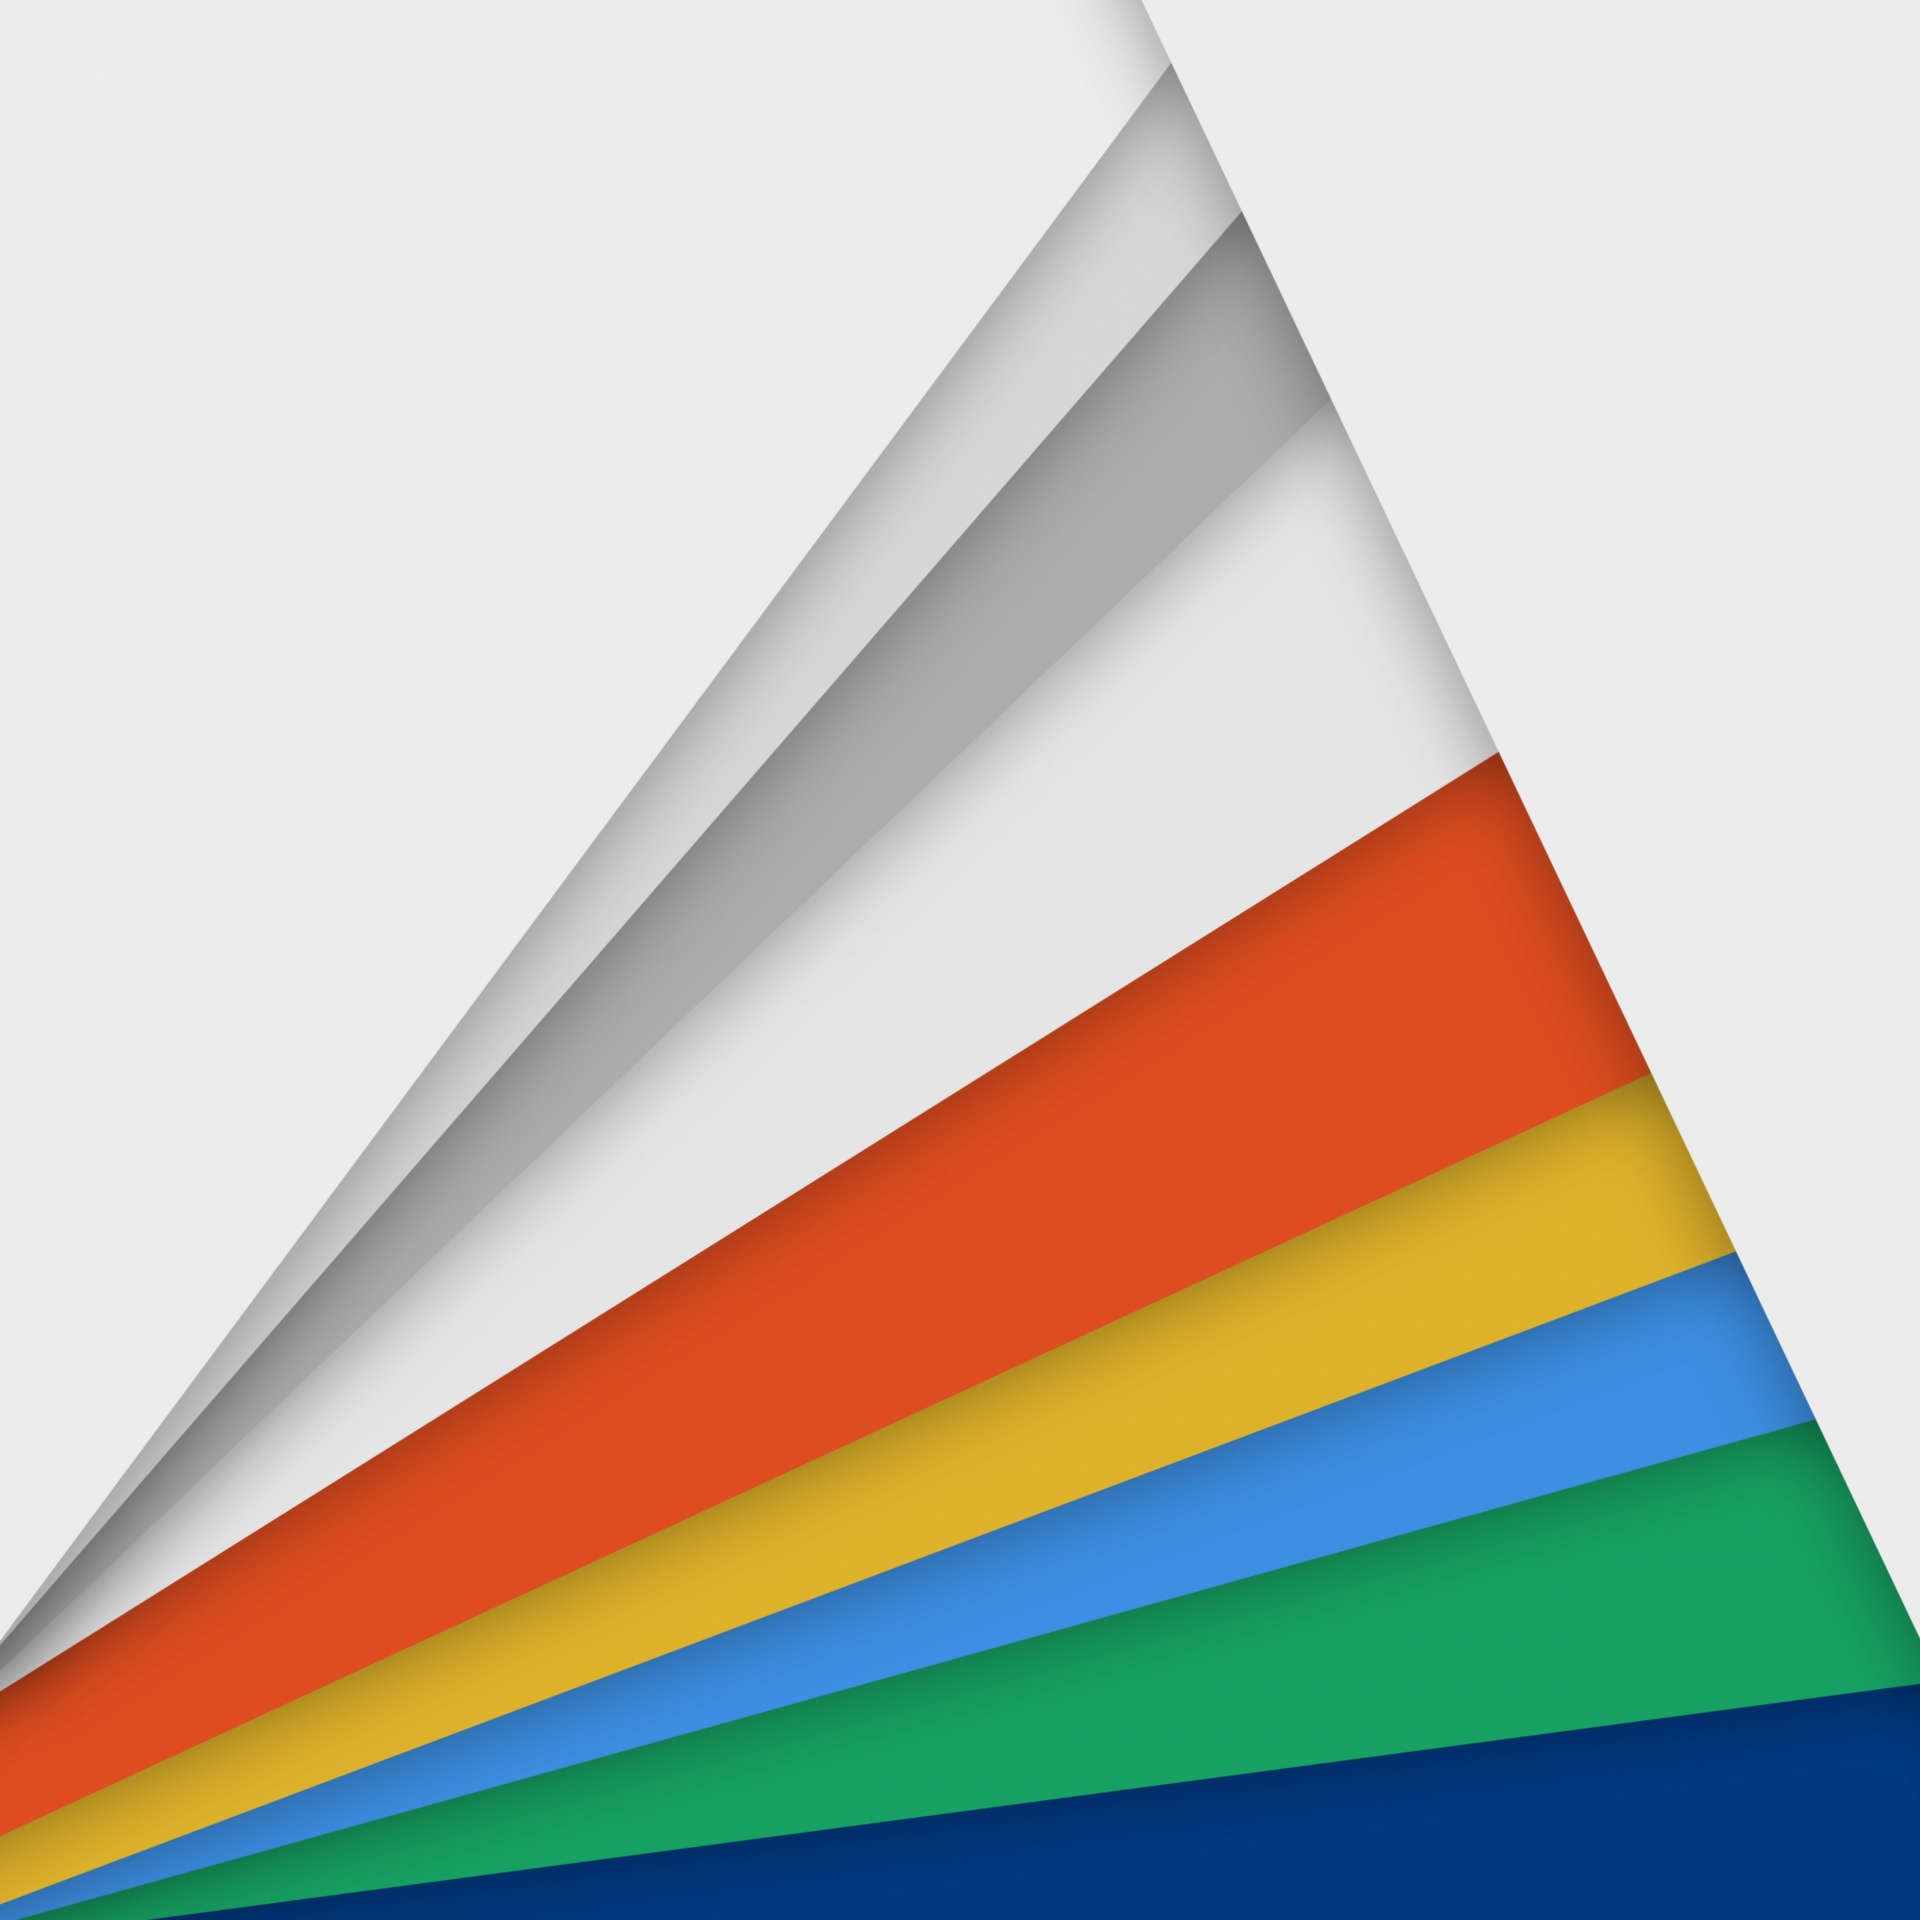 color-triangles-6-free-stock-photo-public-domain-pictures